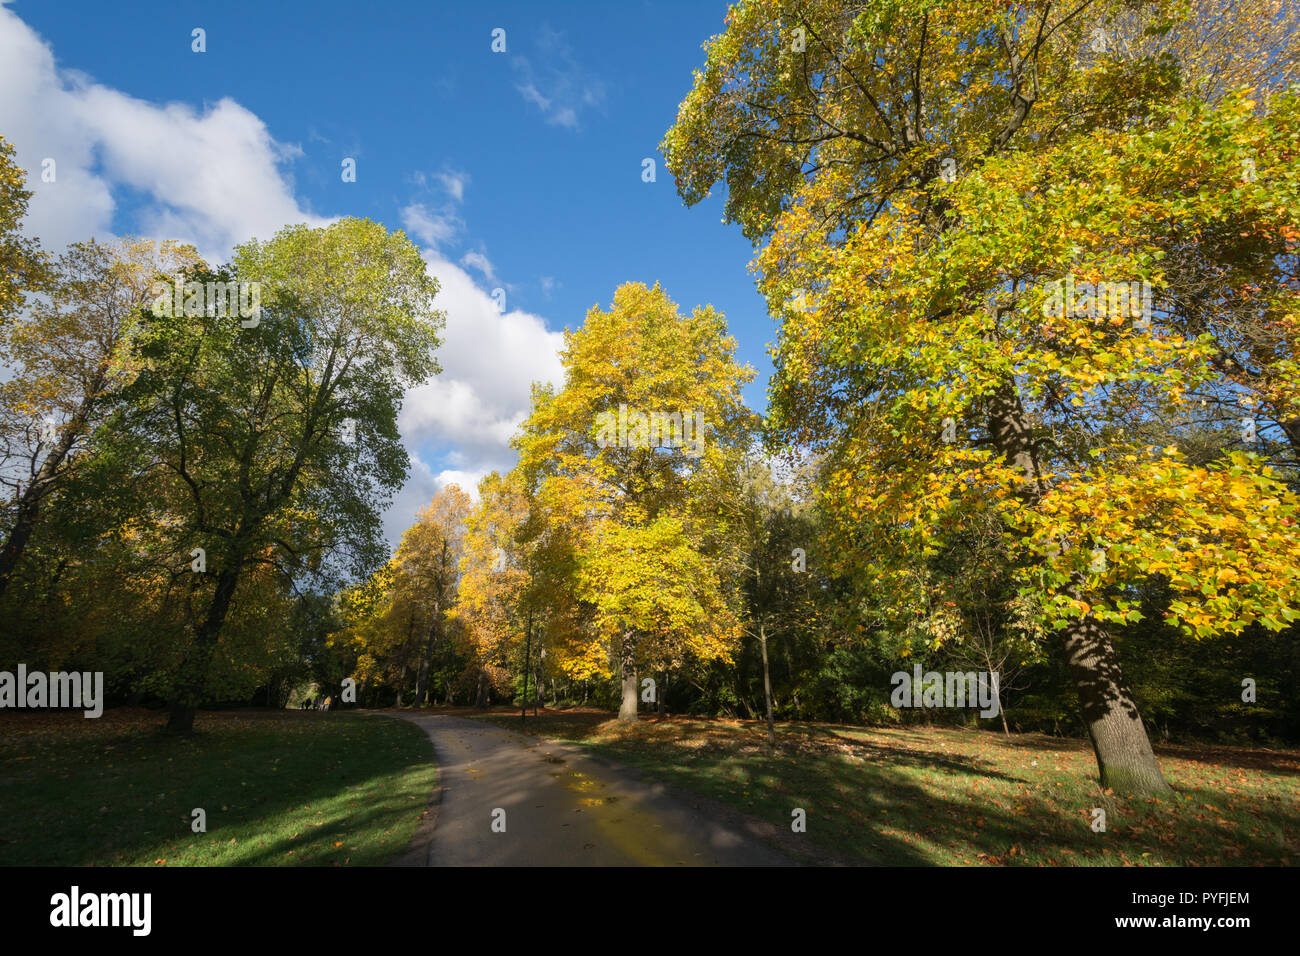 Autumn colours and landscape at Virginia Water Lake, part of Windsor Great Park (Royal Park, Crown Estate) in Surrey, UK Stock Photo